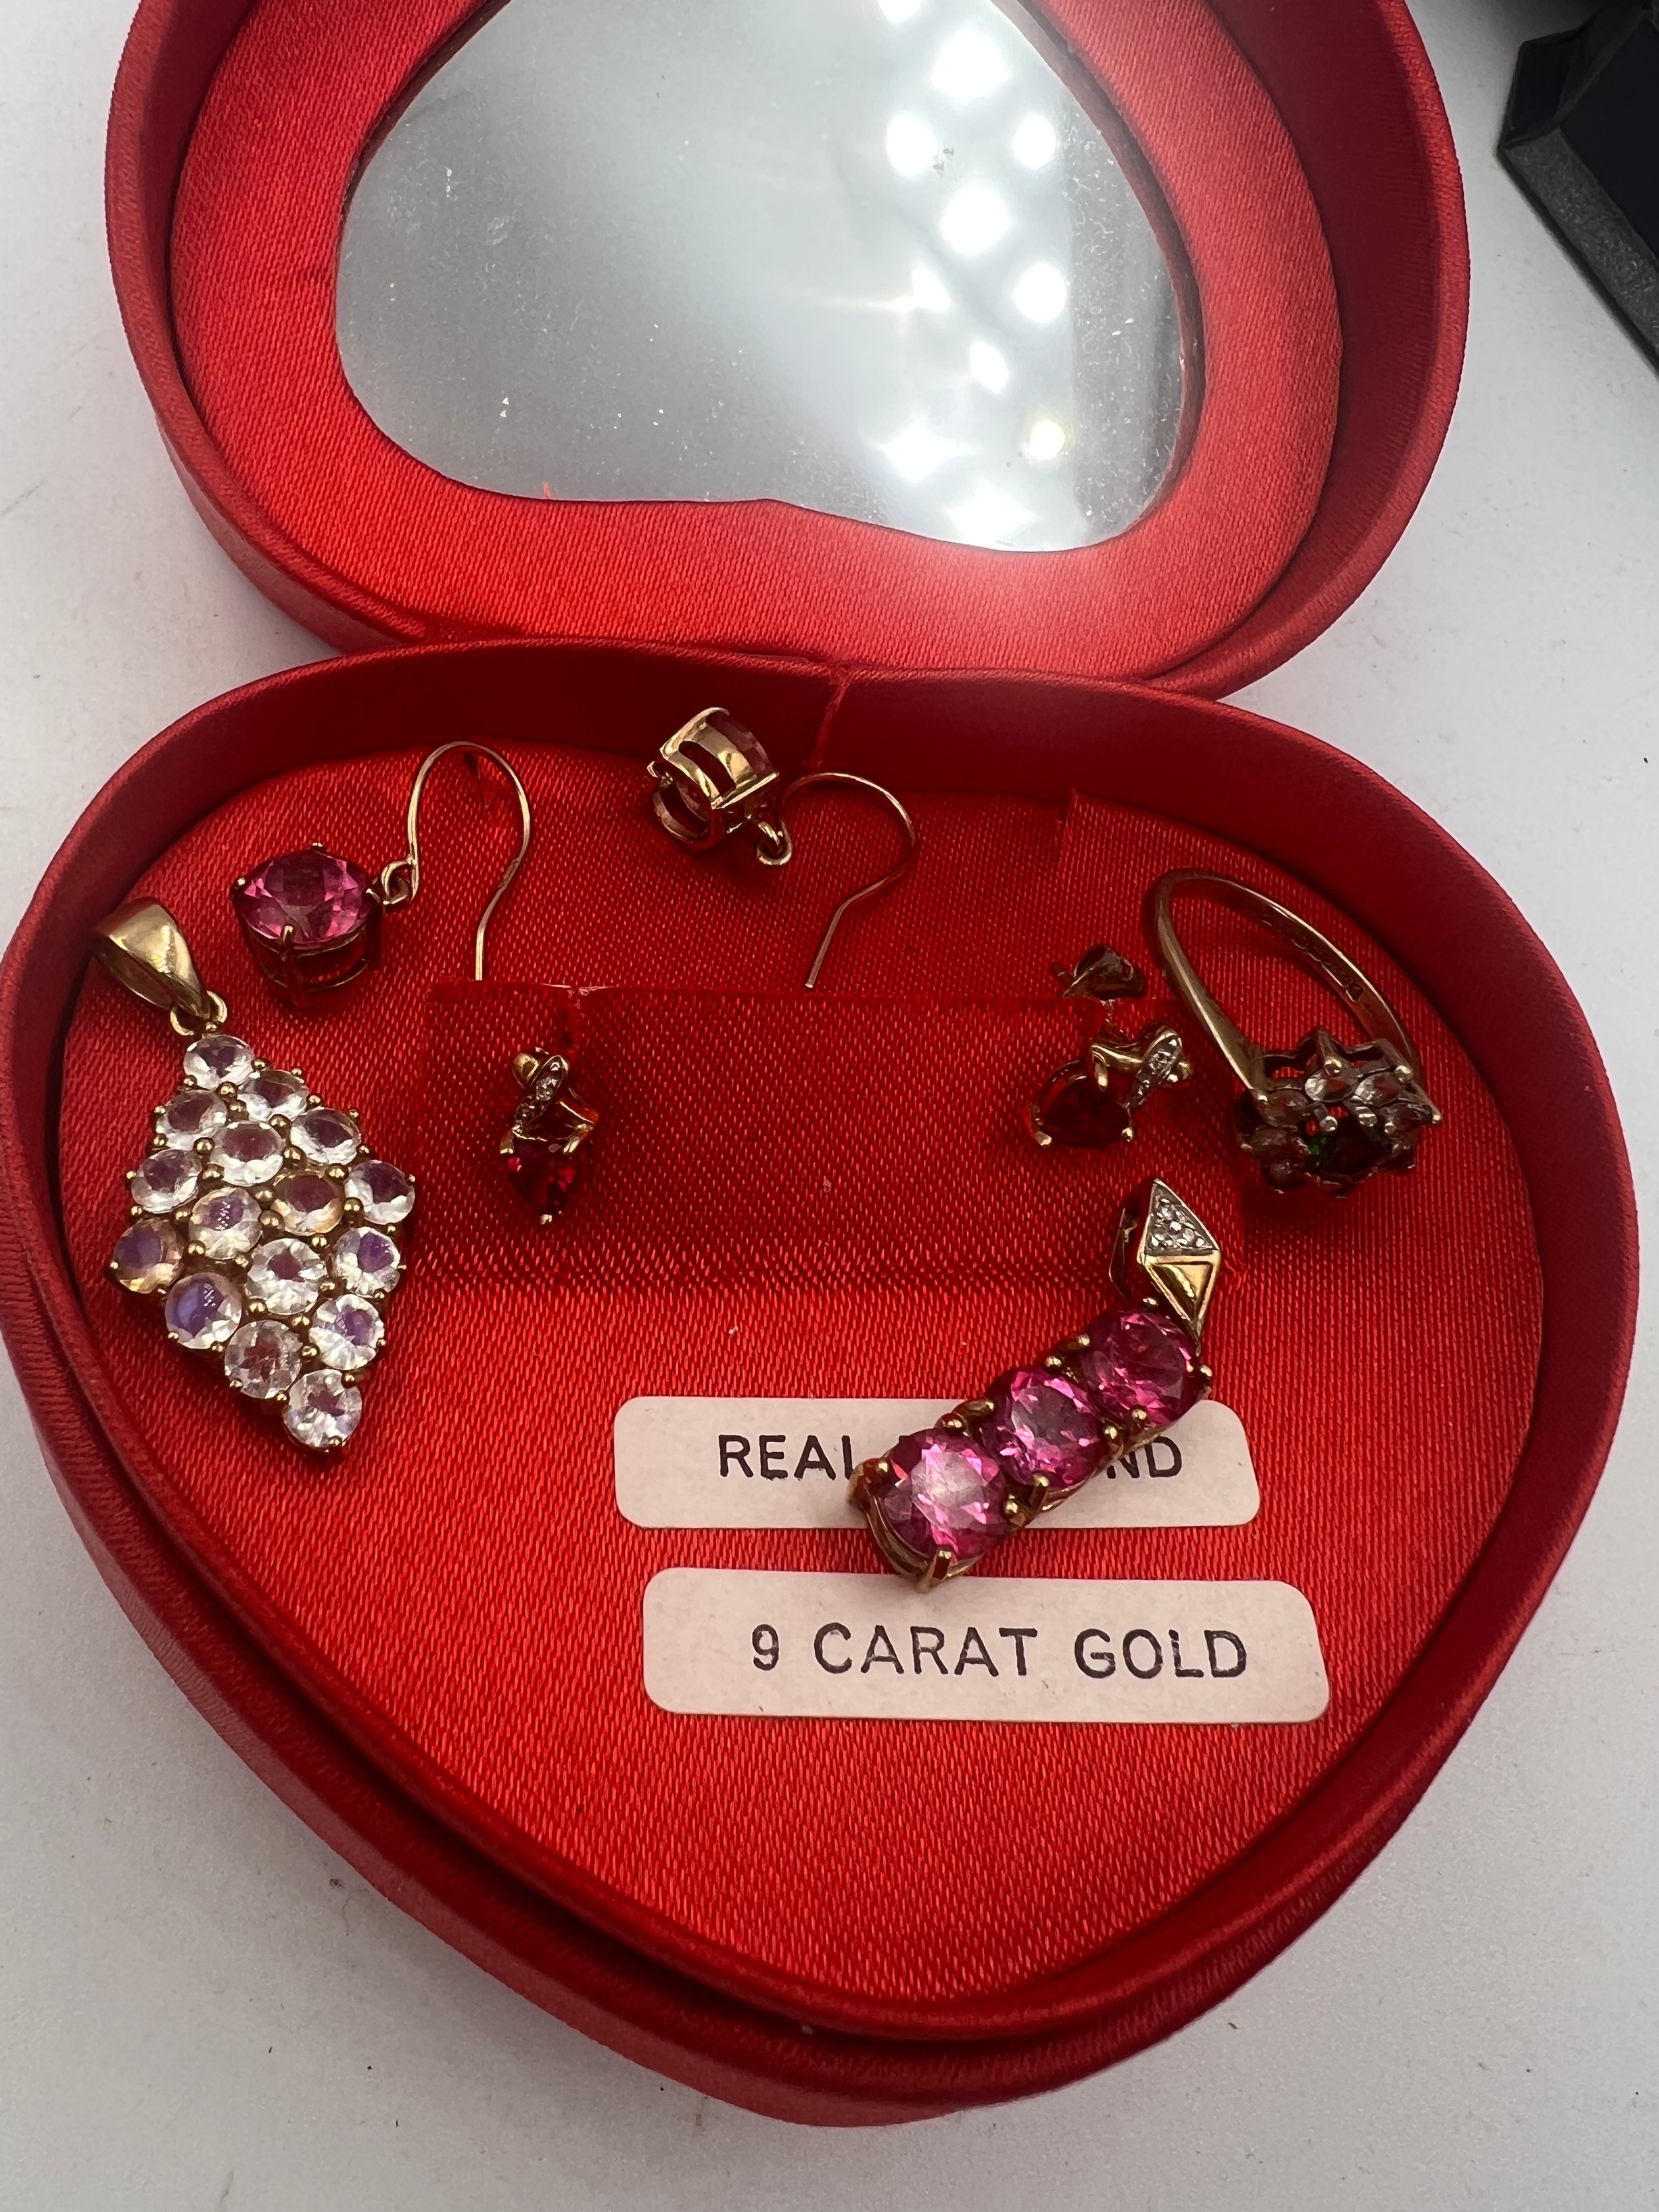 Jewellery to include 2 pairs of 9 carat gold mounted earrings, 2 x 9 carat gold gem set pendants and